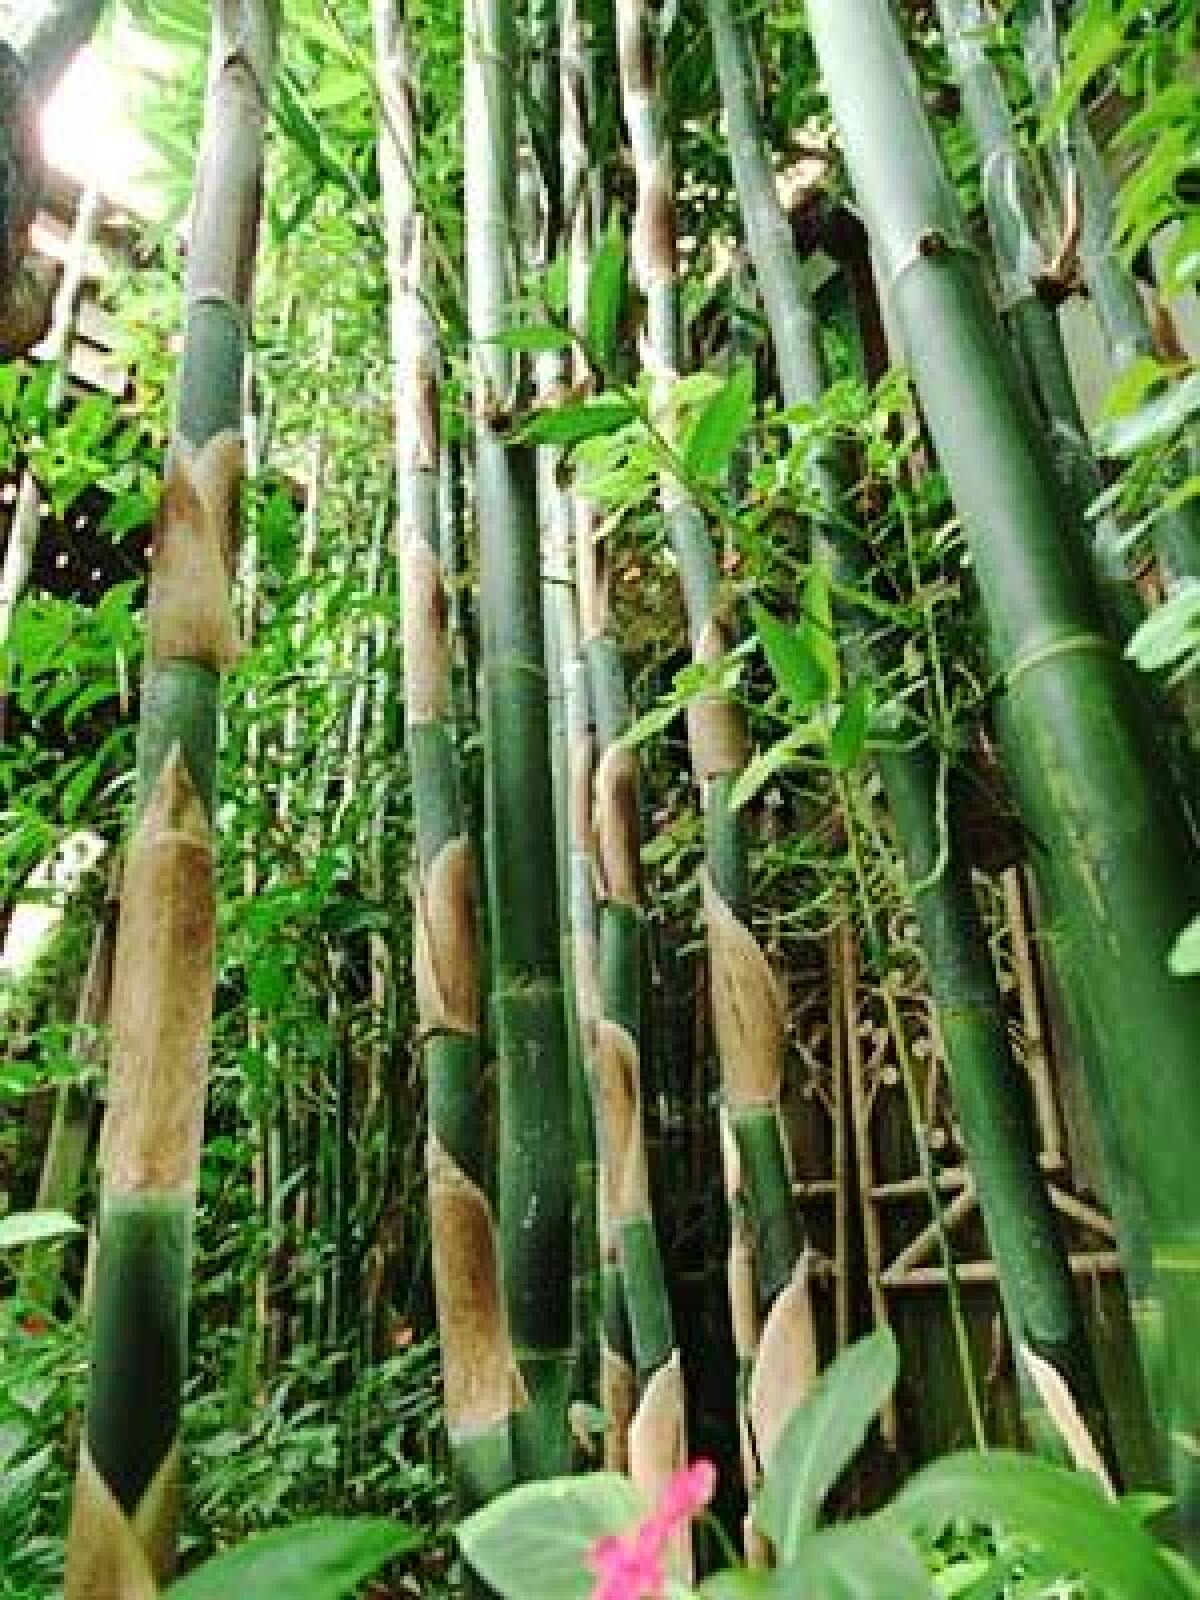 Planted 20 years ago, a variety of giant clumping bamboo reaches up to a height of about 40 feet from a cool, shady part of a resident's yard in Corona del Mar.